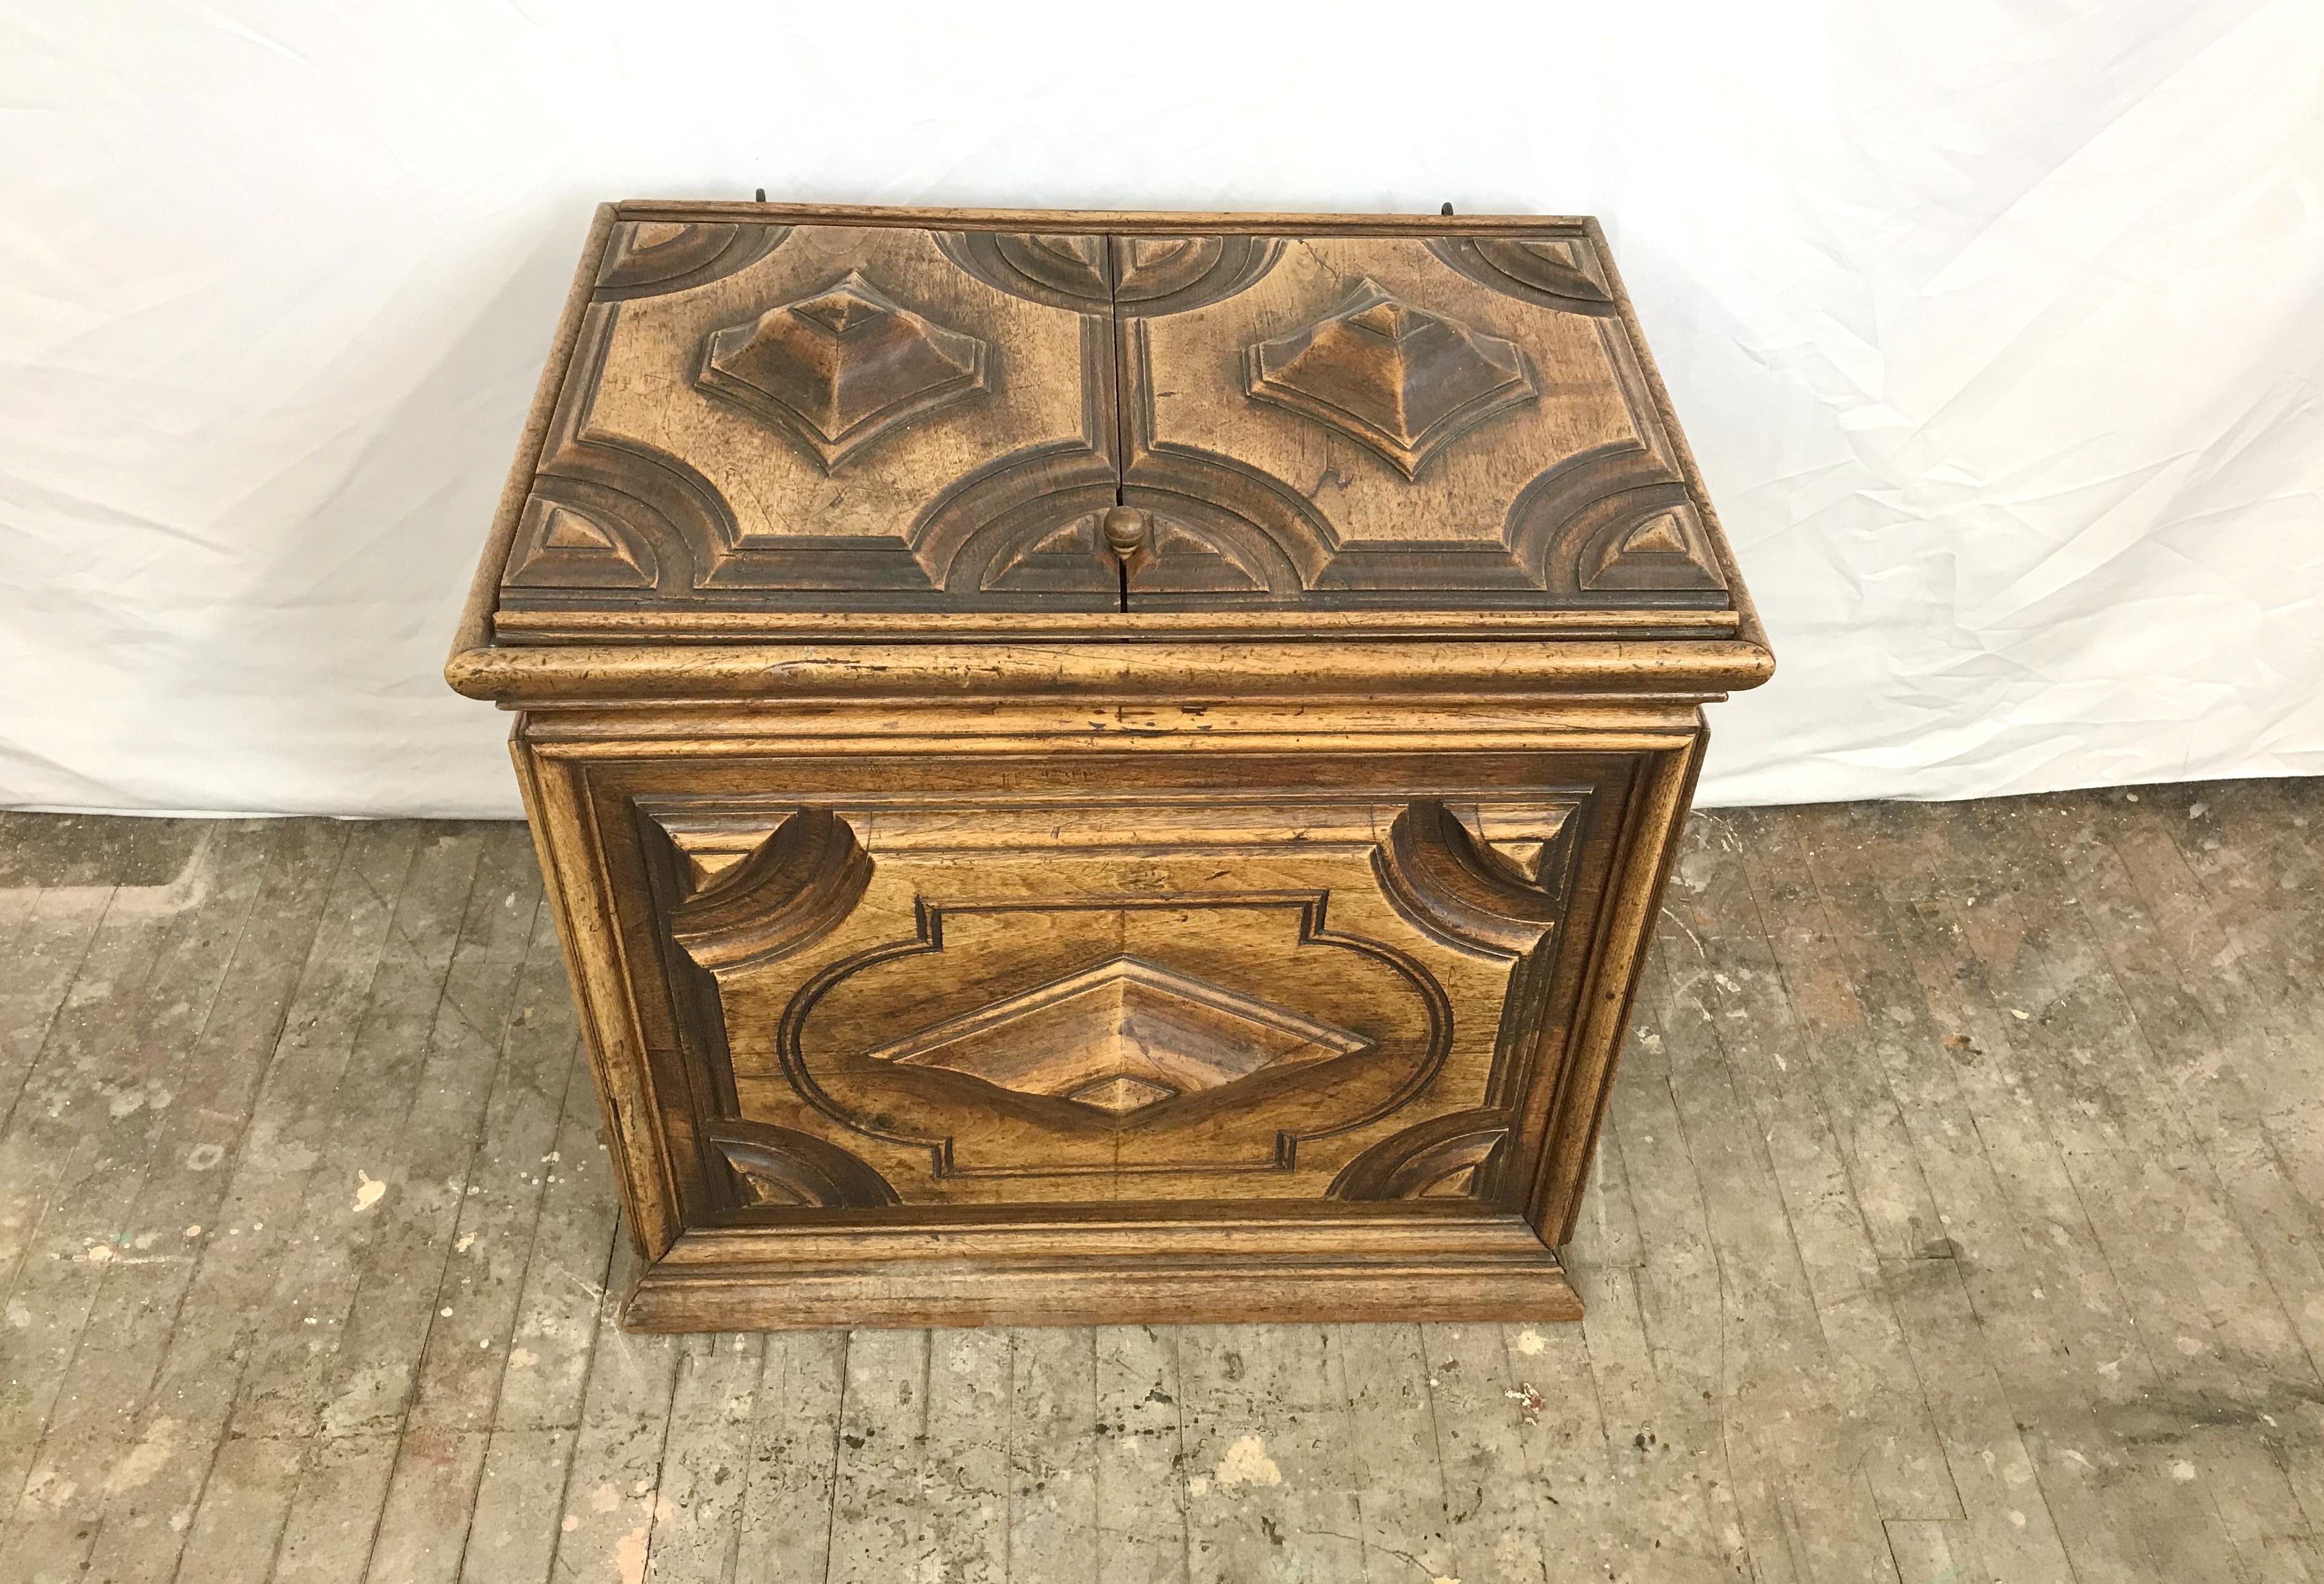 Forged Relief Carved French 18th Century Chest from Academy Award Winner Elmo Williams For Sale